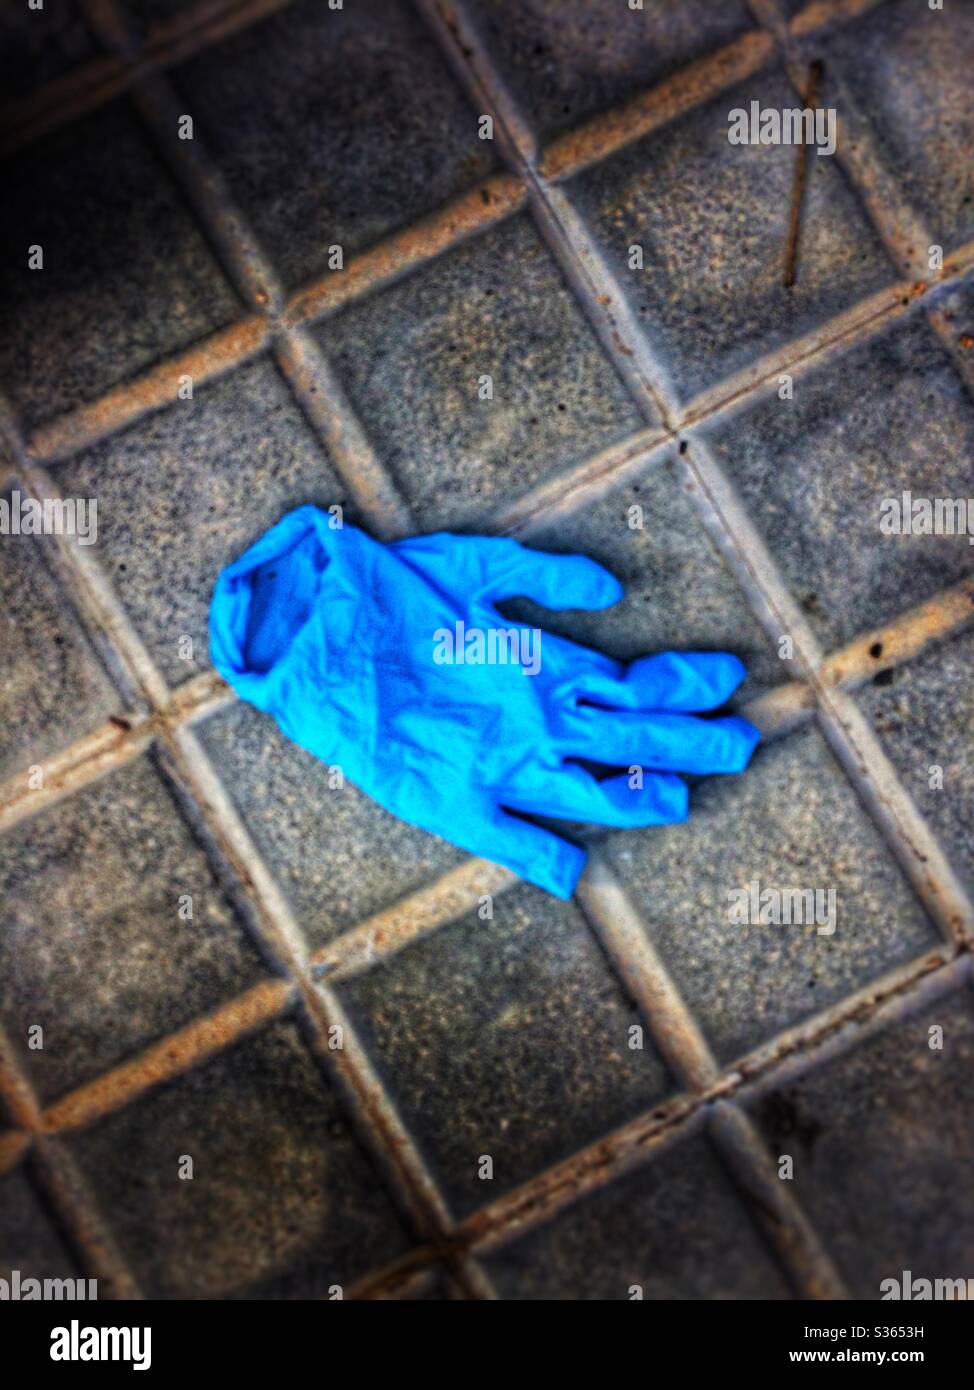 Protective blue gloves abandoned on the street Stock Photo